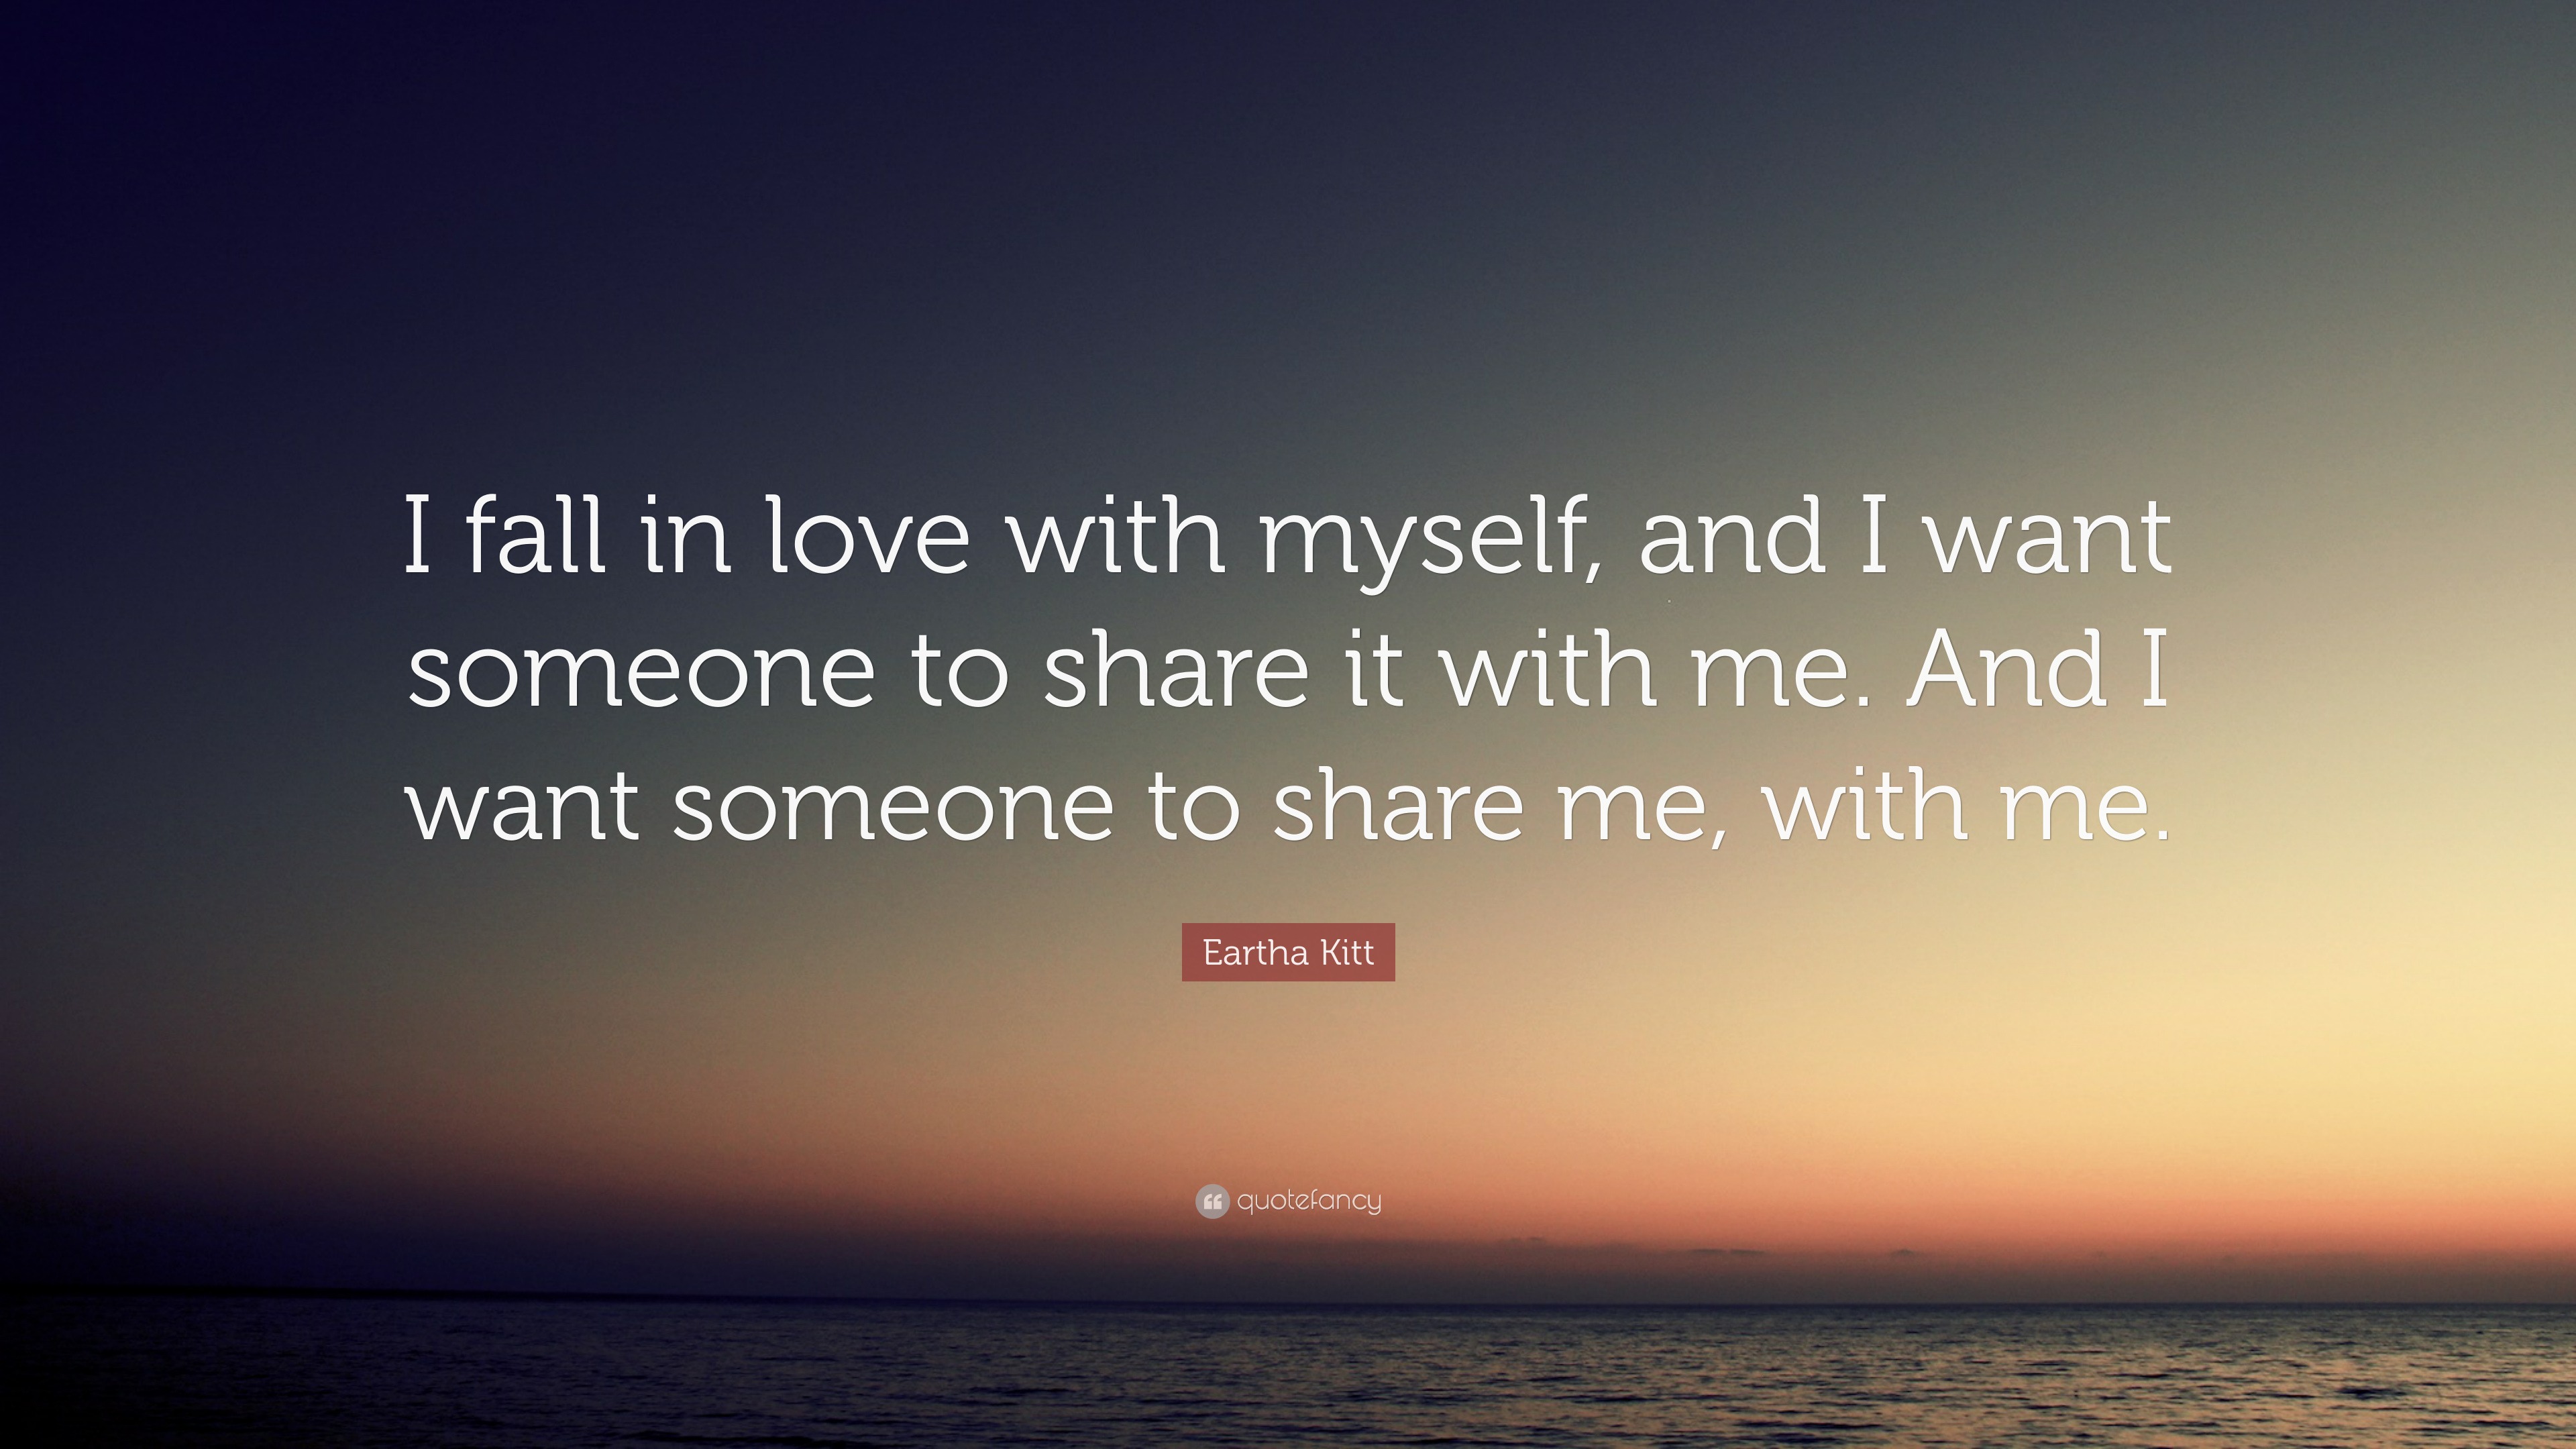 Eartha Kitt Quote “i Fall In Love With Myself And I Want Someone To Share It With Me And I 